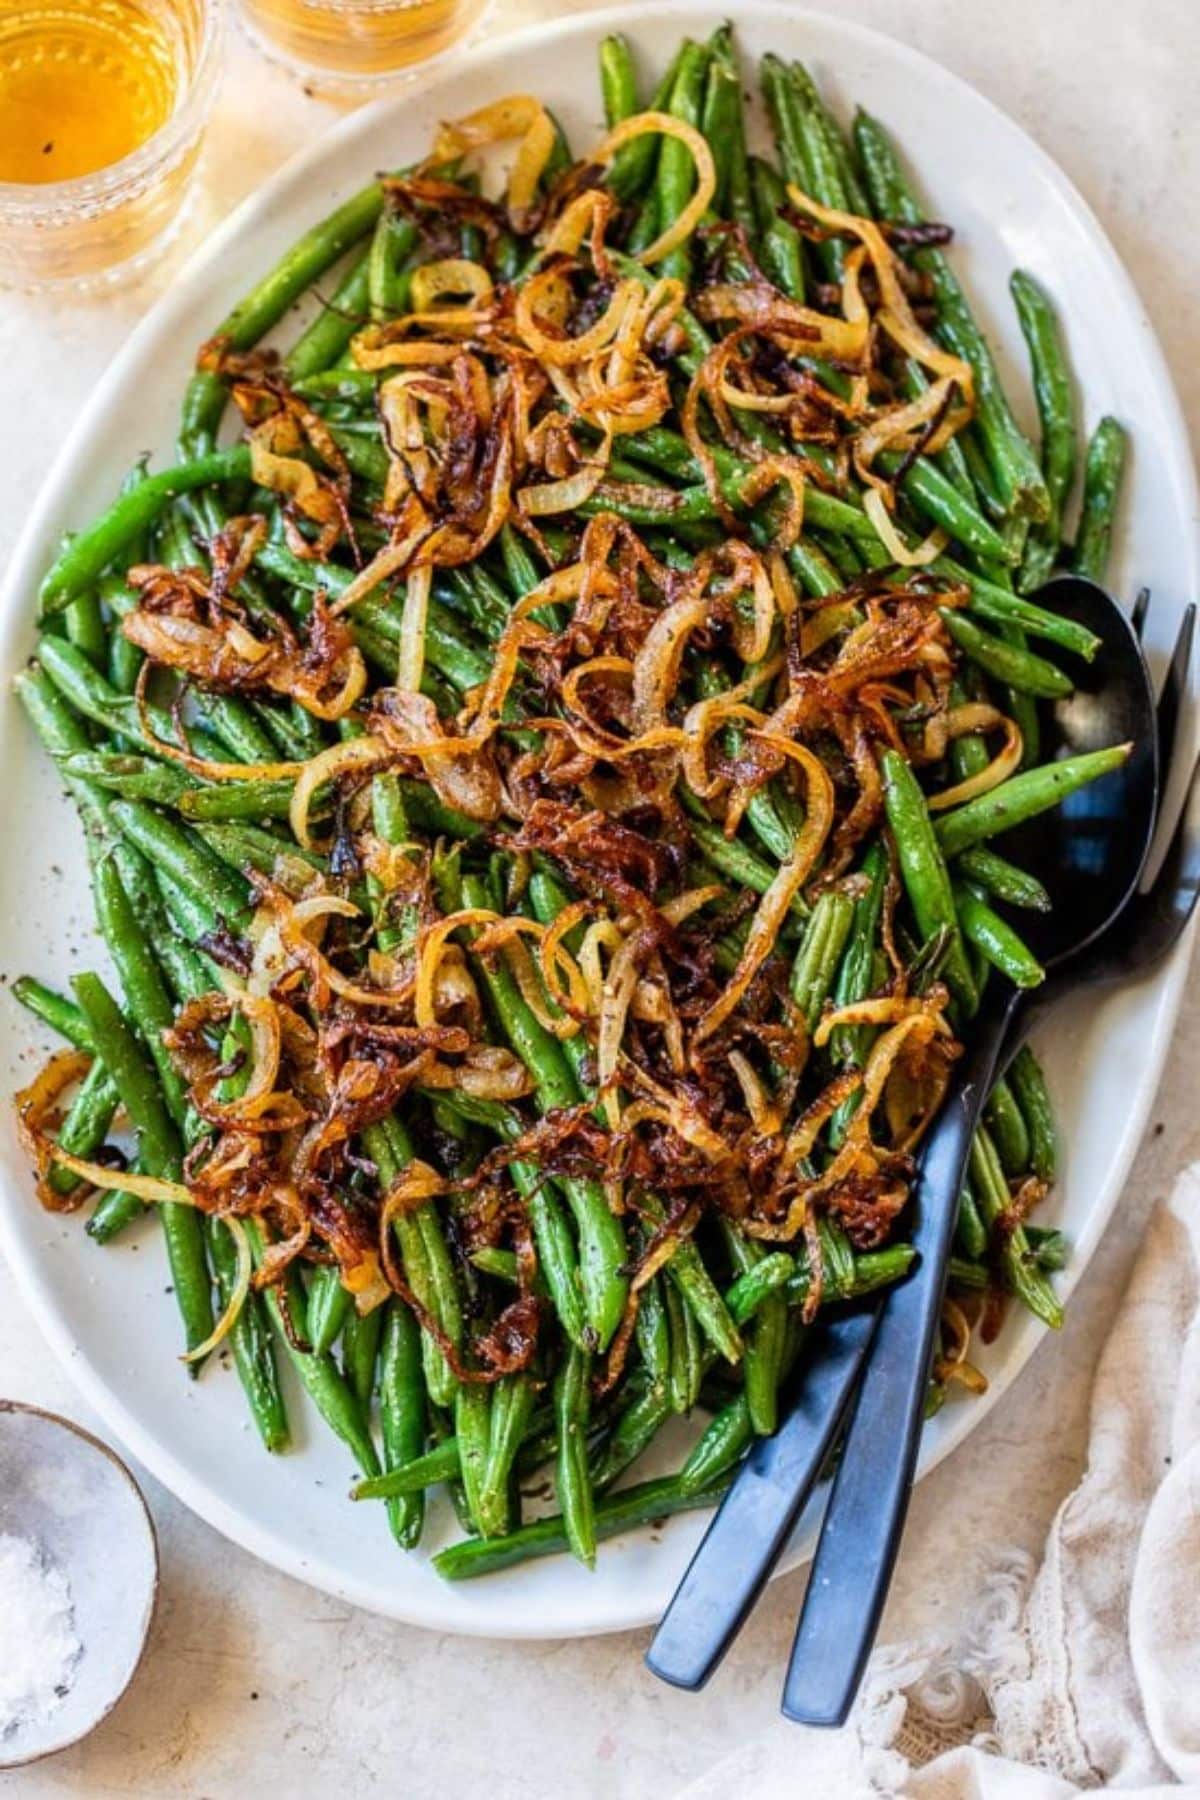 Delicious Roasted Green Beans With Caramelized Onions on a white tray.